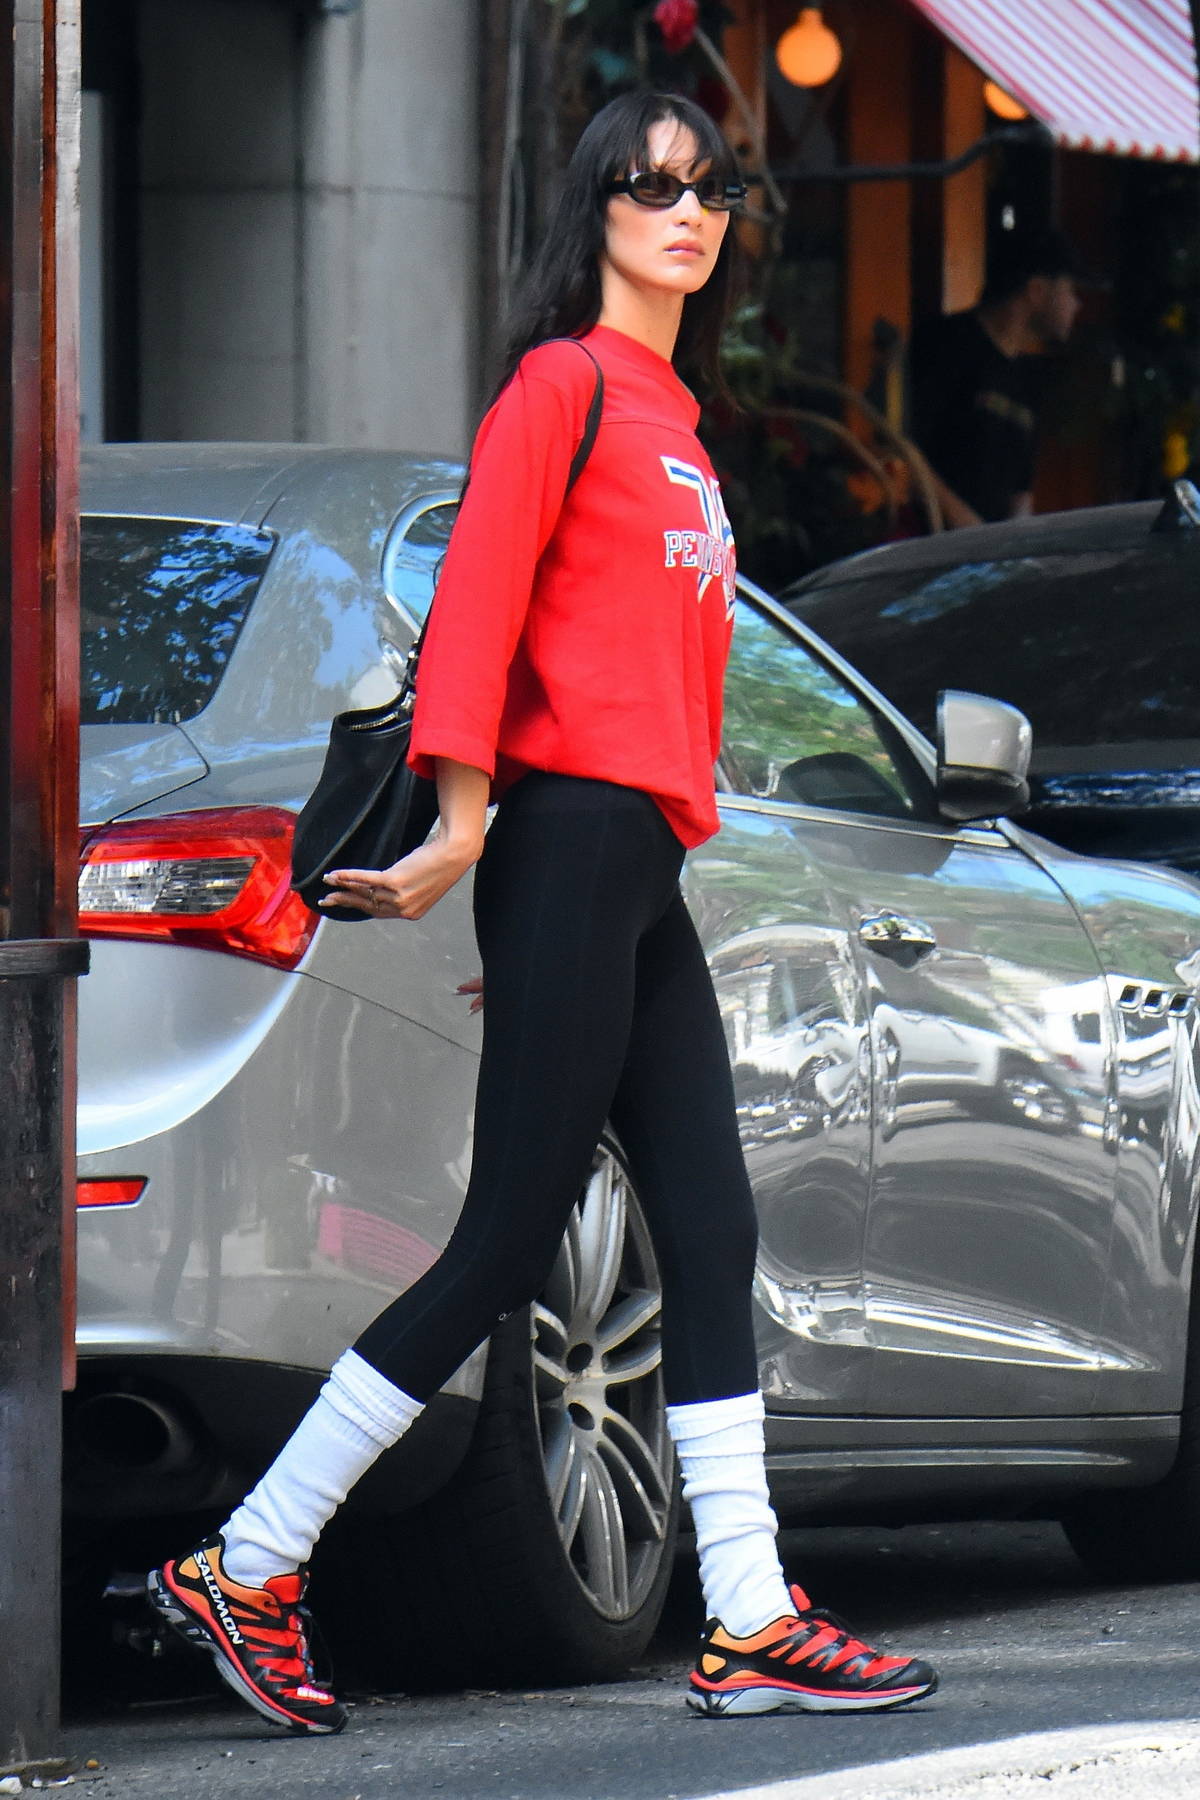 Bella Hadid wears a bright red sweater and black leggings while